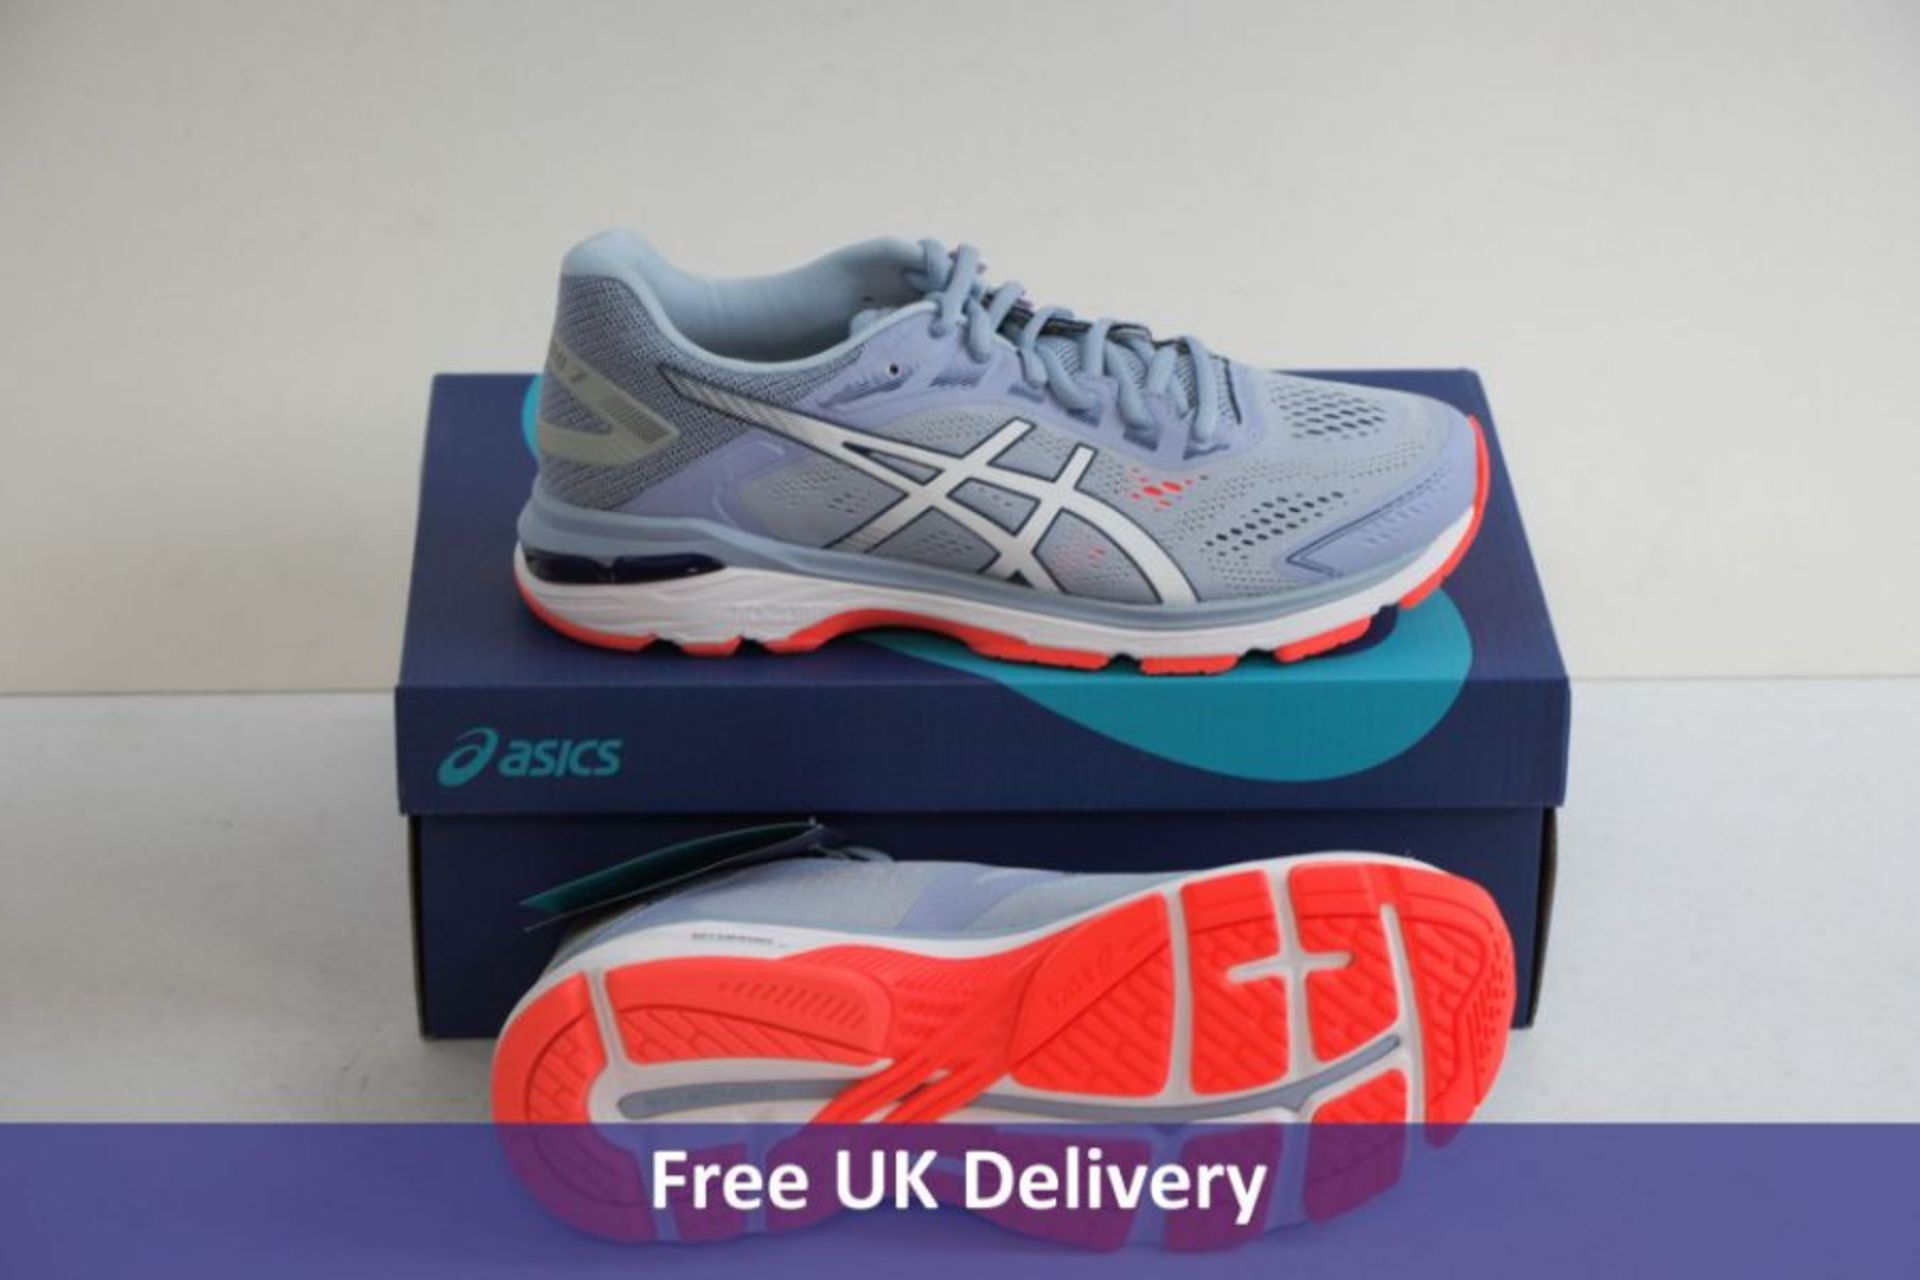 Asics Women's GT 2000 7 Trainers, Mist and White, UK 7.5